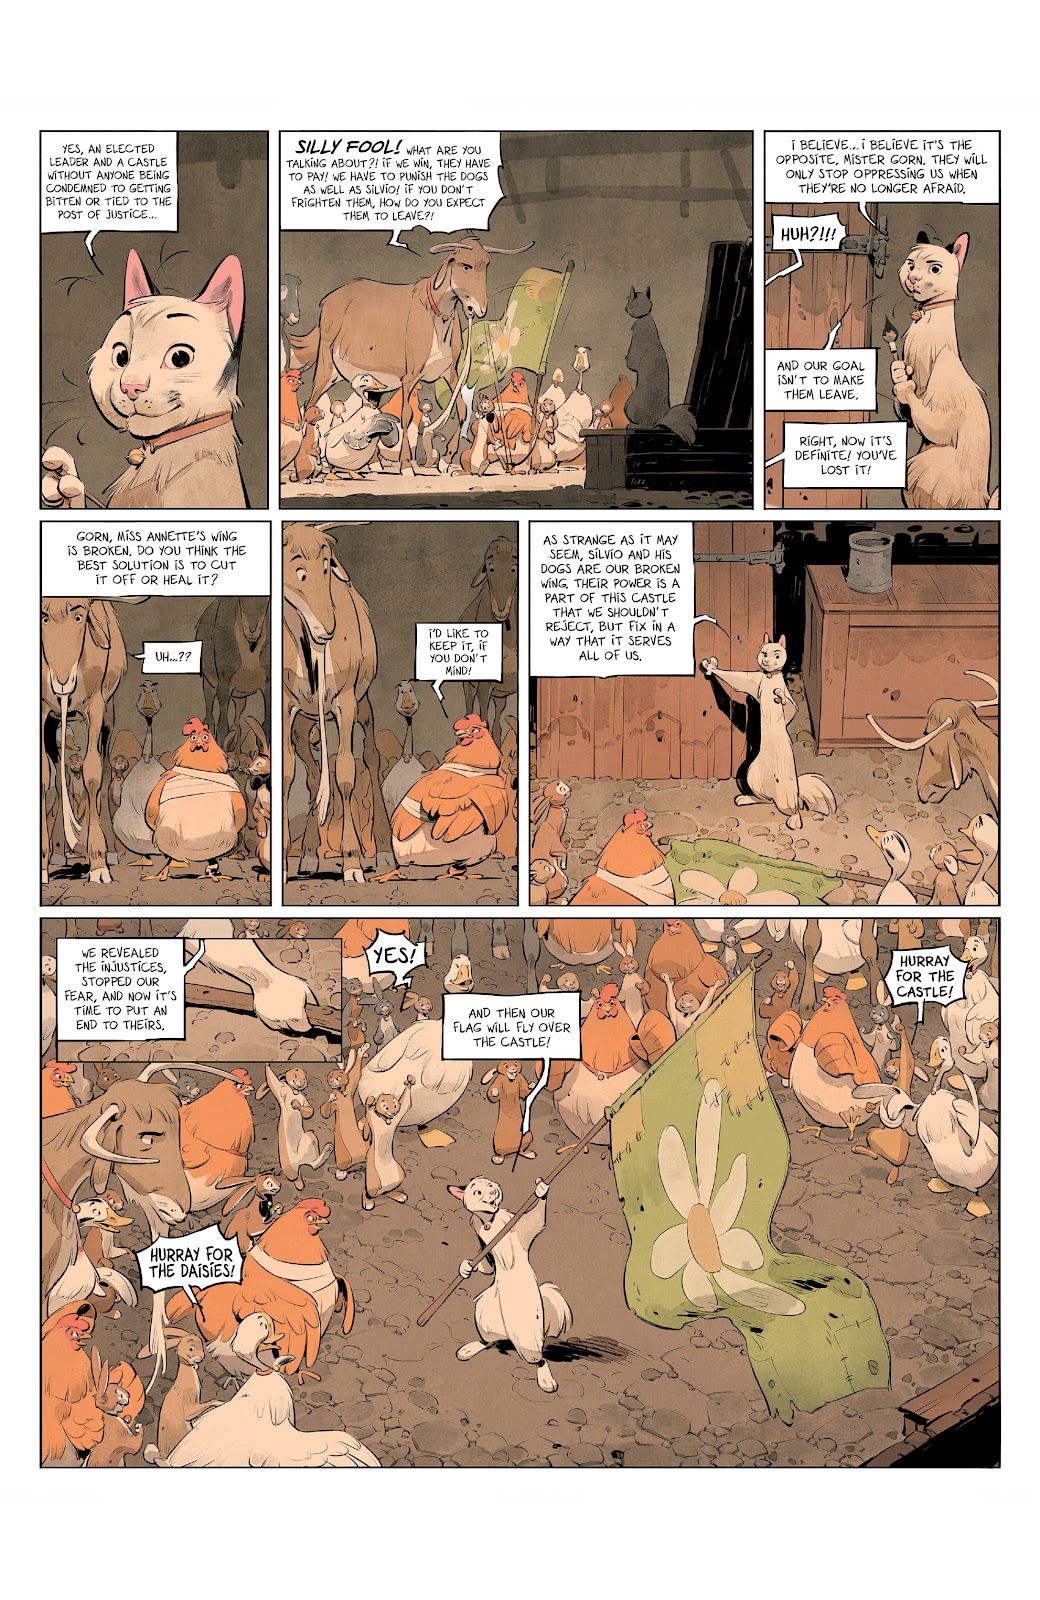 Animal Castle Vol. 2 issue 1 - Page 17